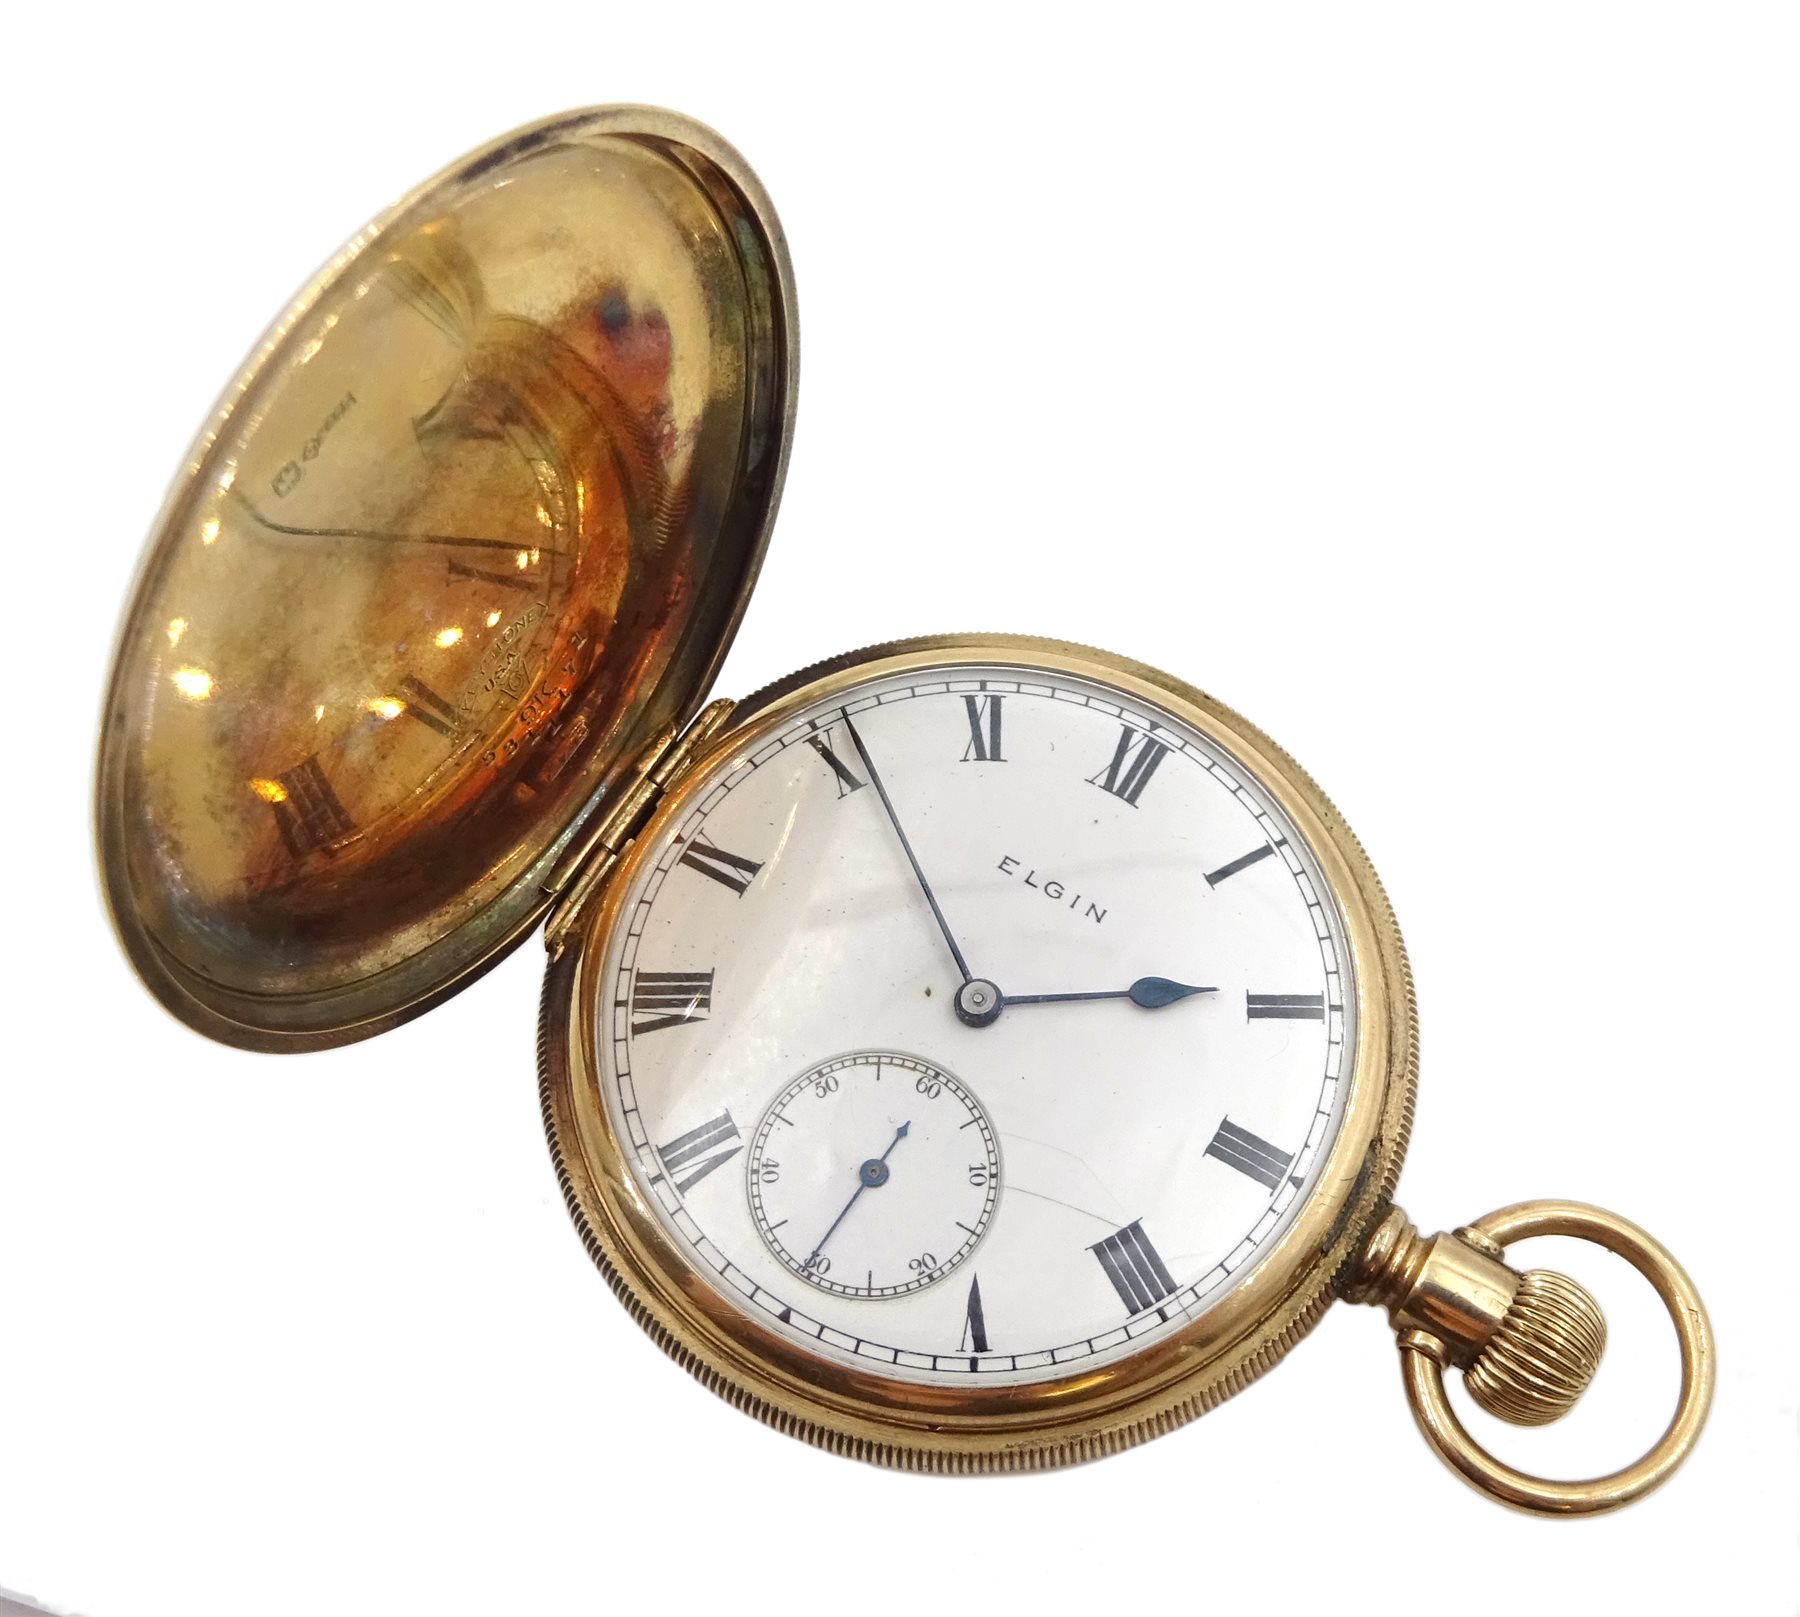 Elgin early 20th century 9ct gold full hunter pocket watch top wound, No. 18741683, case by Keysone